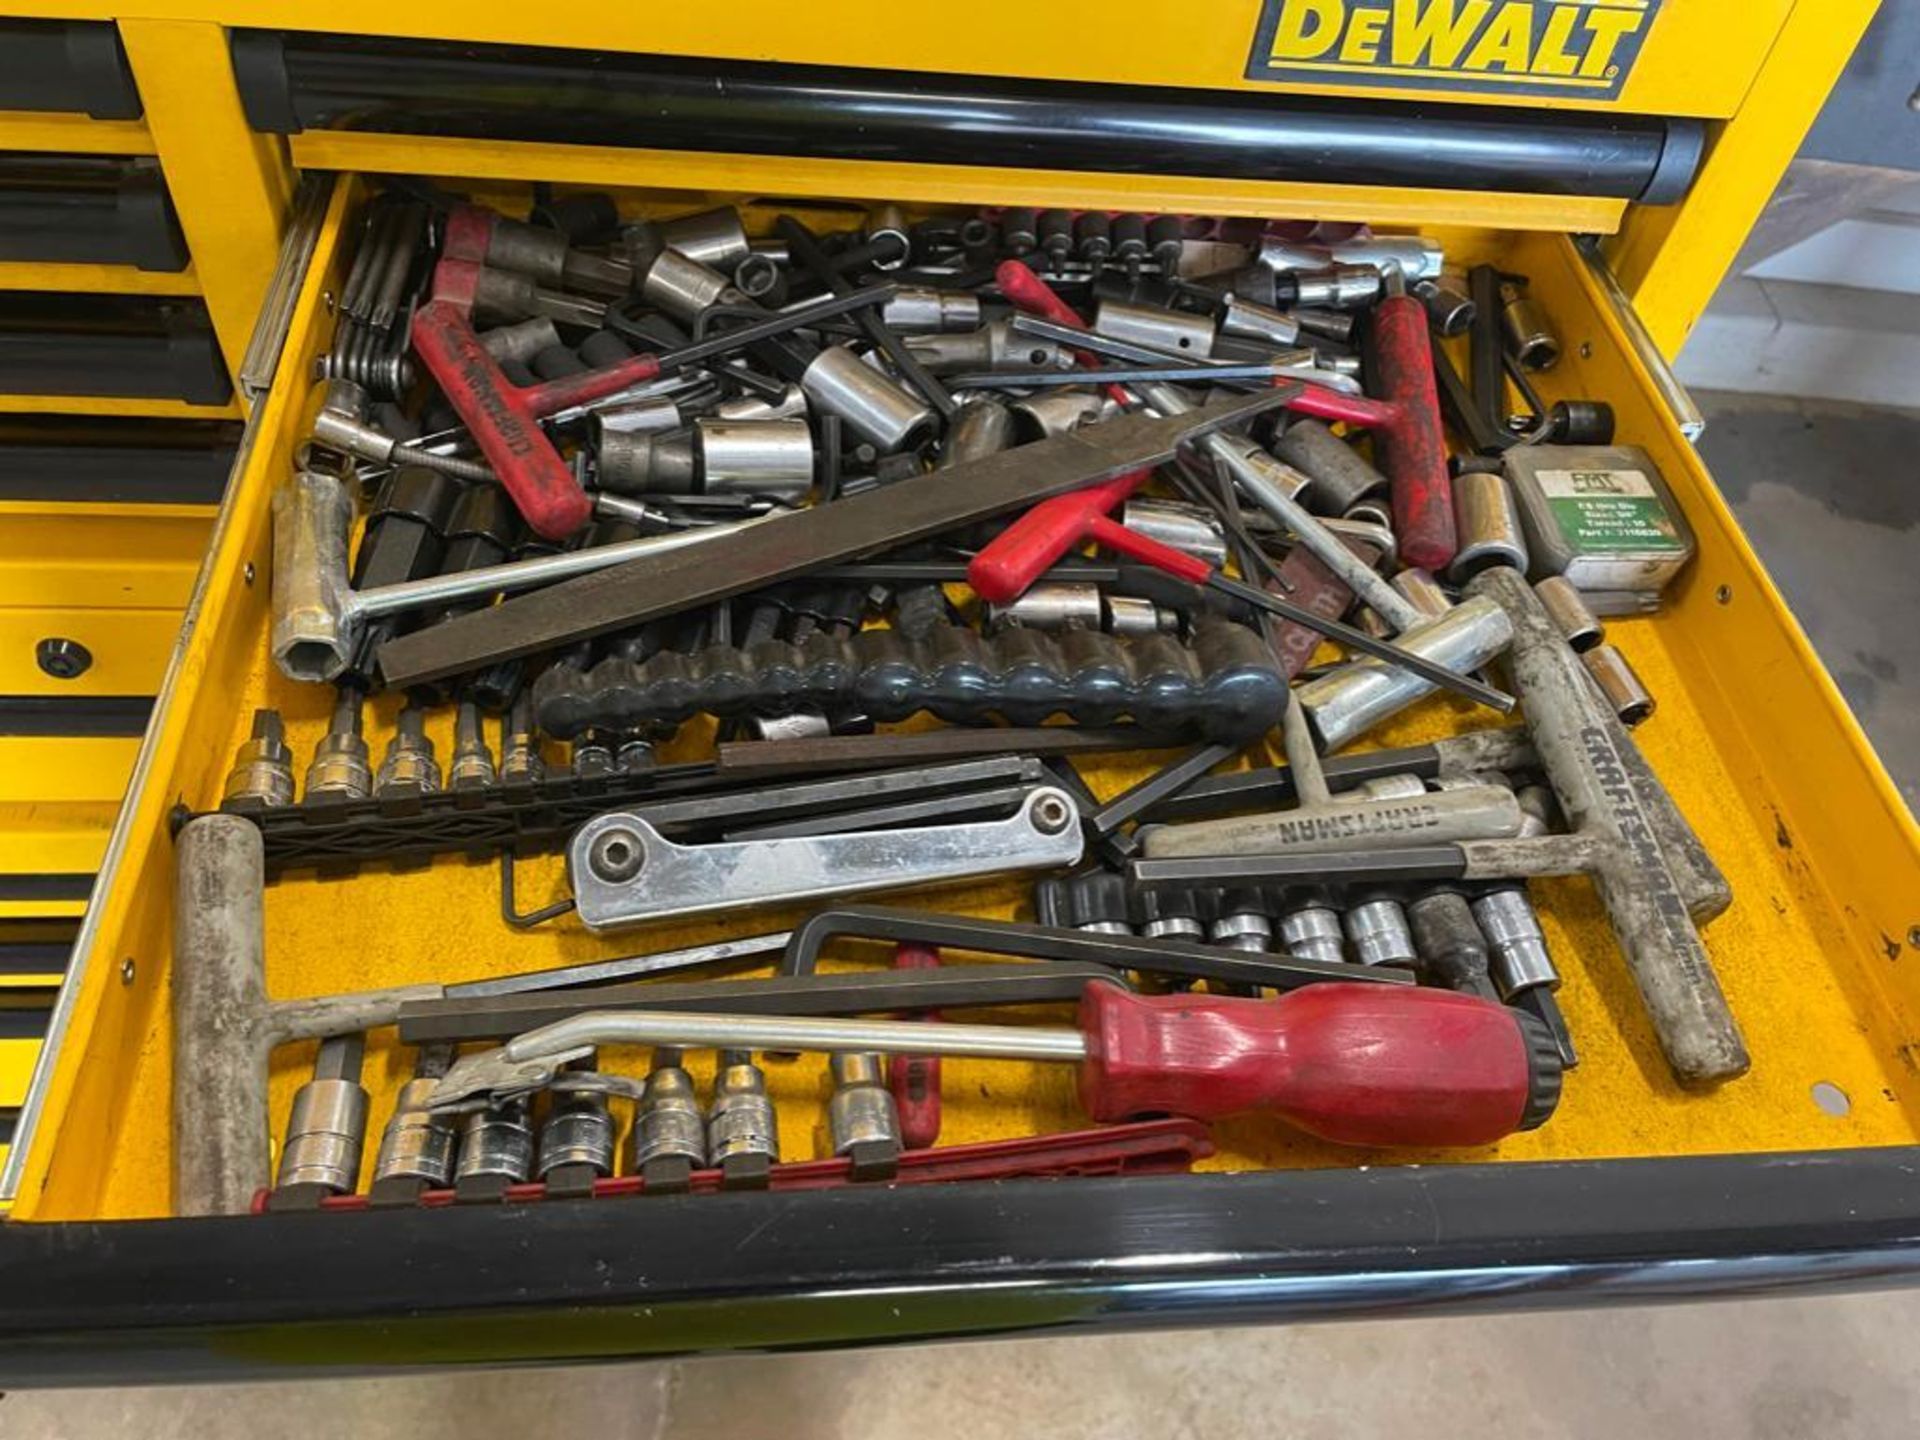 DeWalt Mechanics Tool Box with Contents, Wrenches, Sockets, Plyers, Pipe Wrench, Screwdrivers, etc. - Image 12 of 24